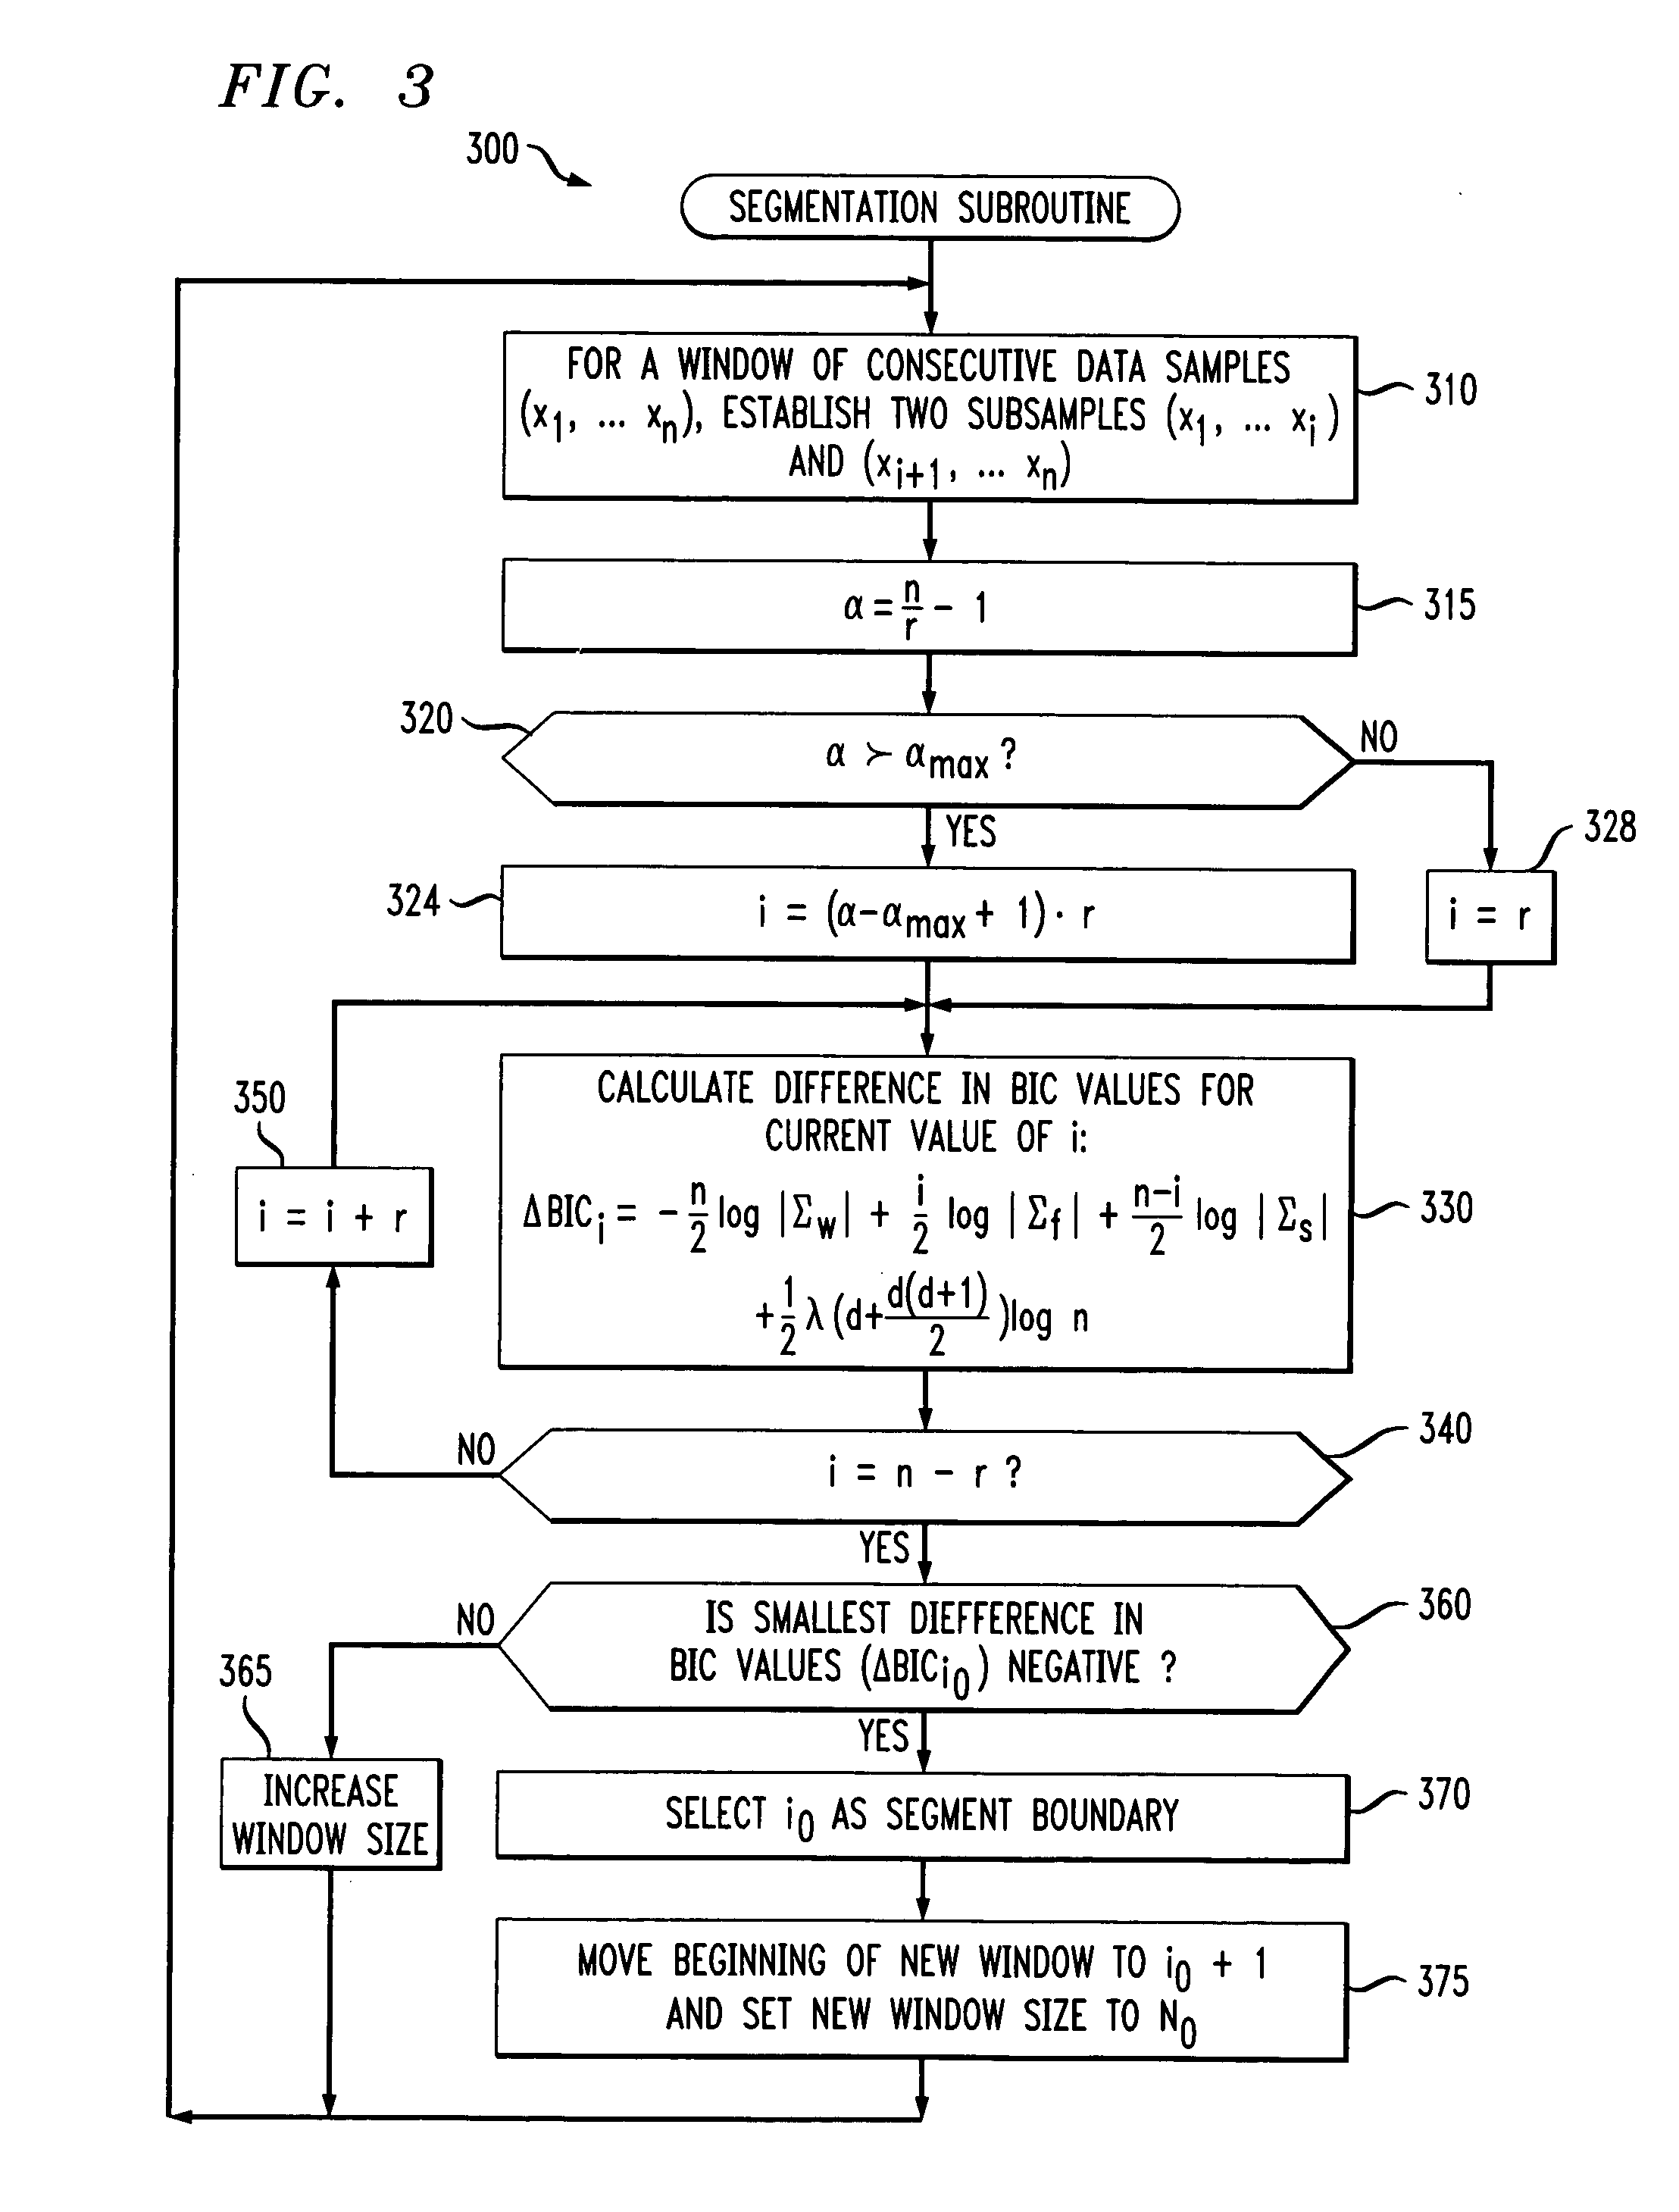 Methods and apparatus for tracking speakers in an audio stream